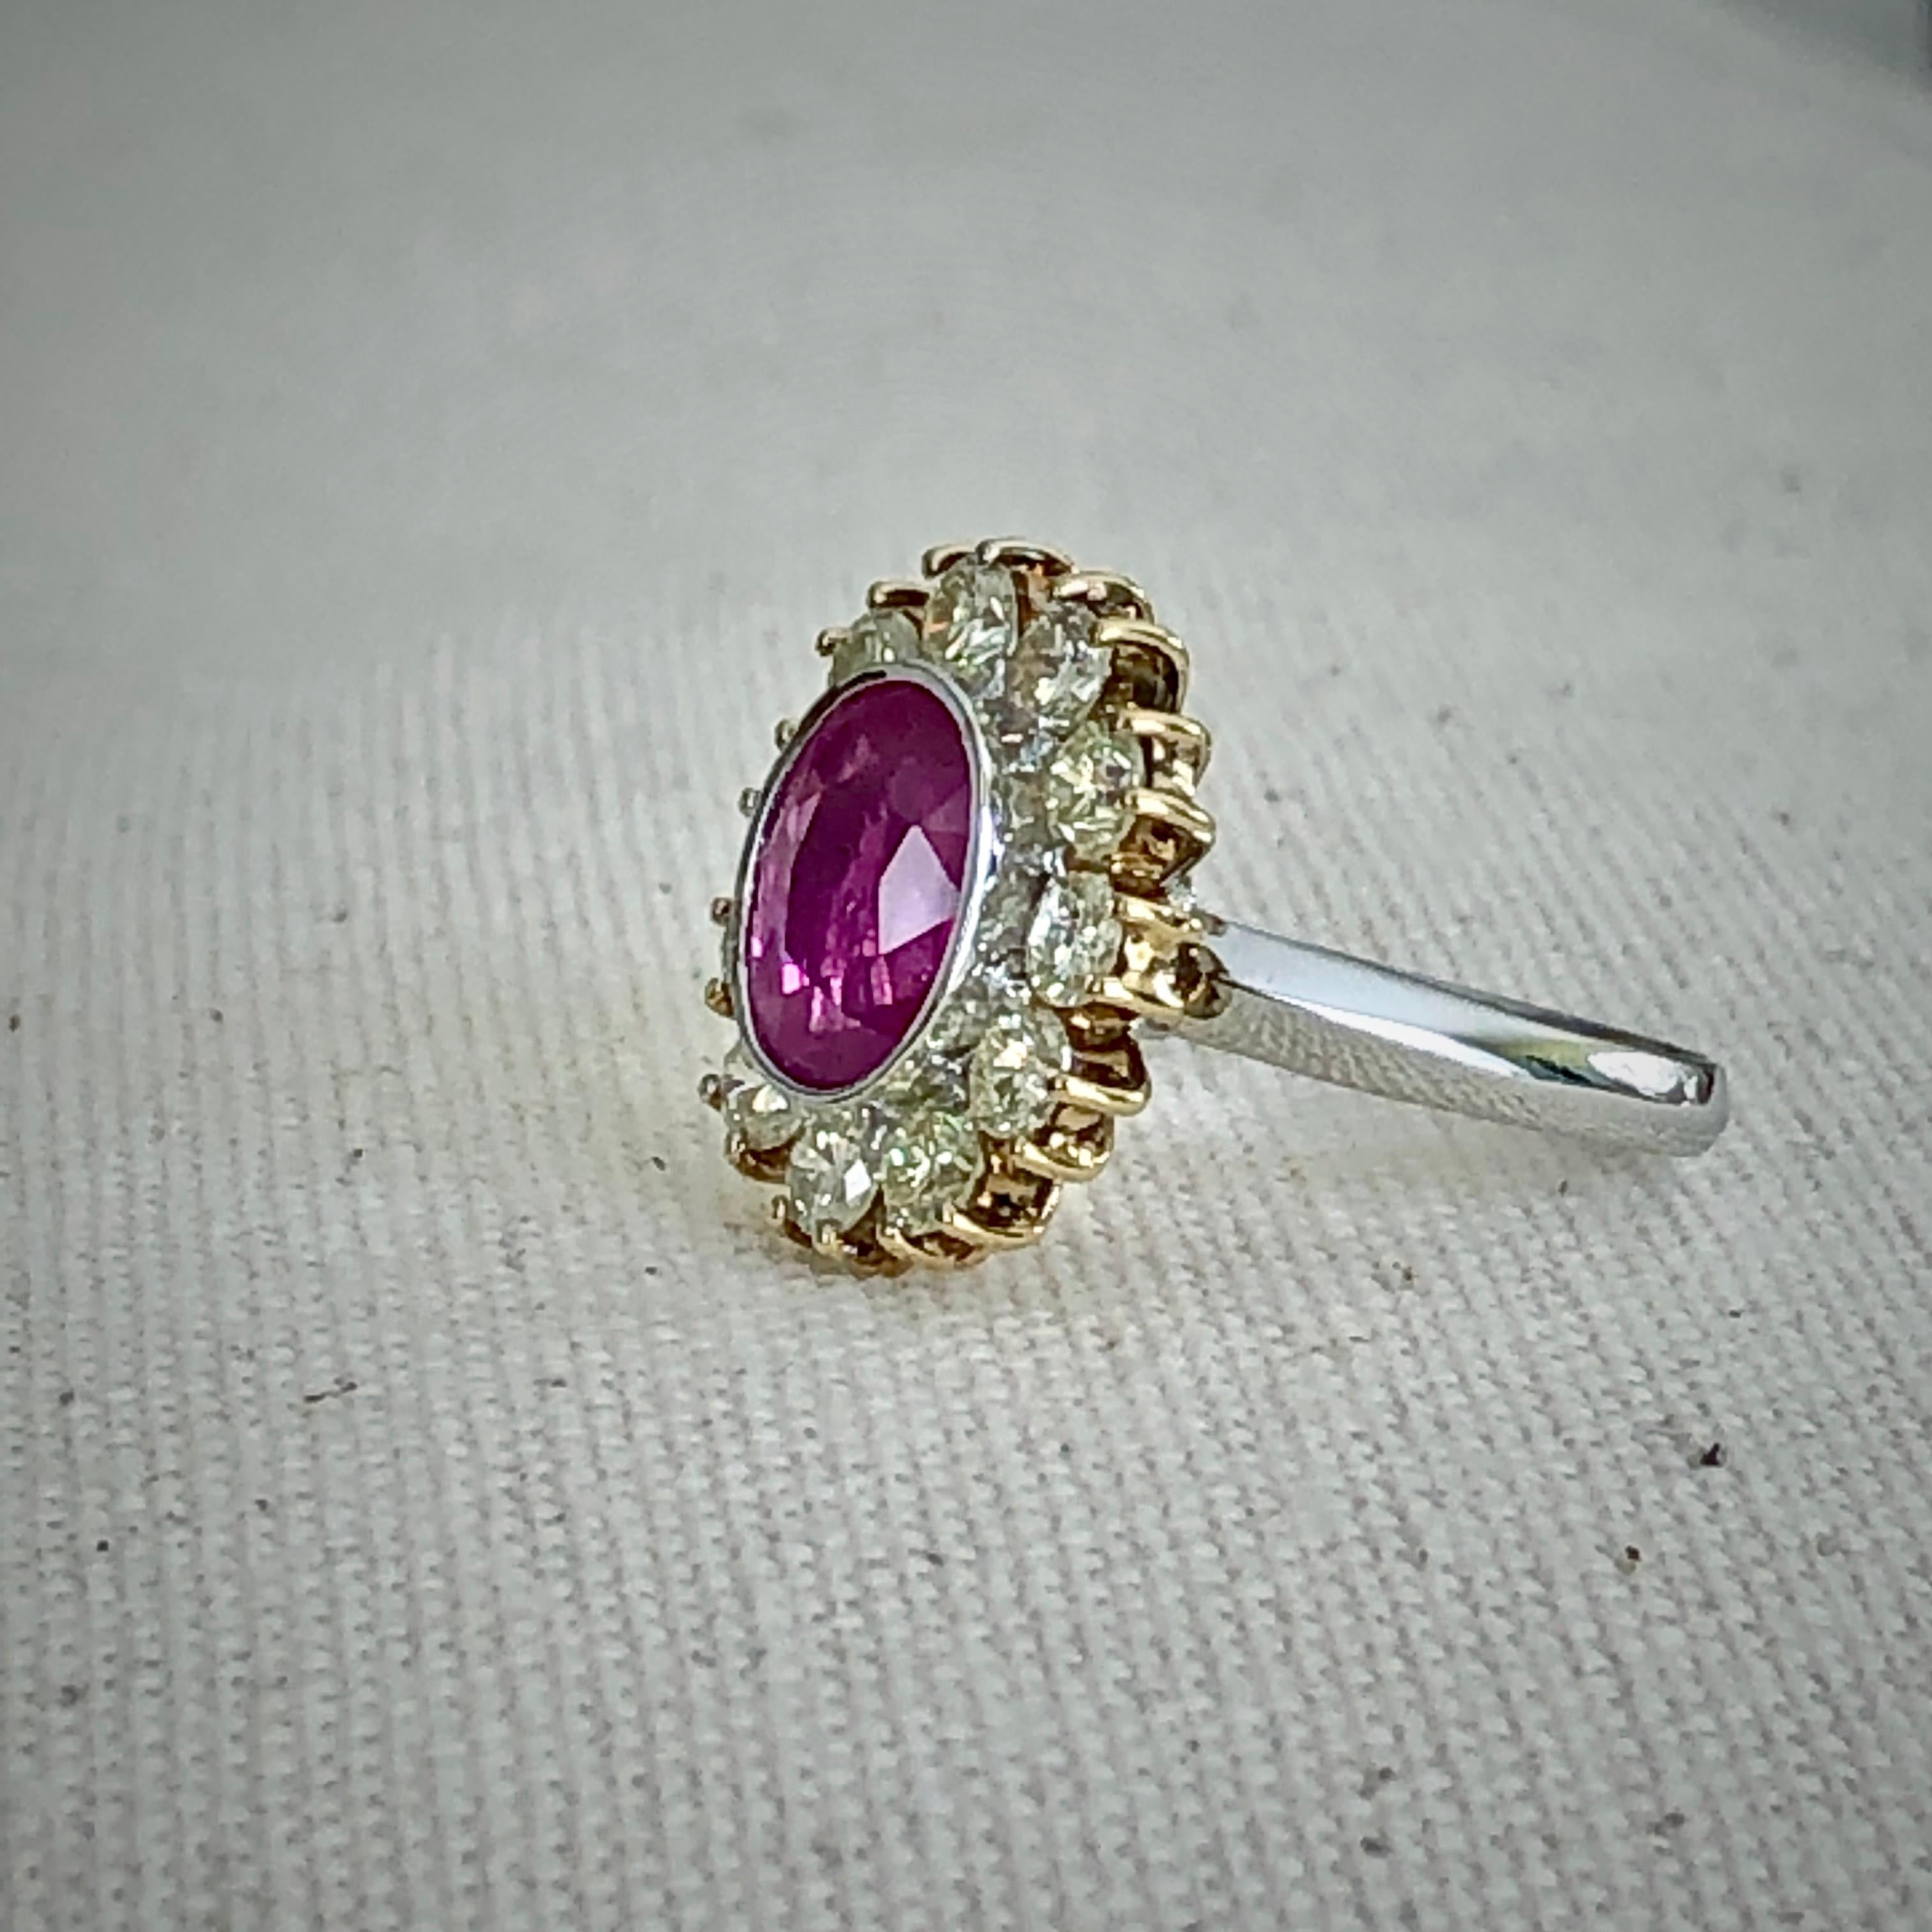 A beautiful ring comprising a scarce 3.10 carat oval bubble gum pink sapphire and 1.54 carats of round diamonds around it. 
Primary Stones: Stunning Natural Sapphire
Shape or Cut: Oval Cut
Average Color/Clarity: Hot Pink/ Clarity VS
Total Sapphire